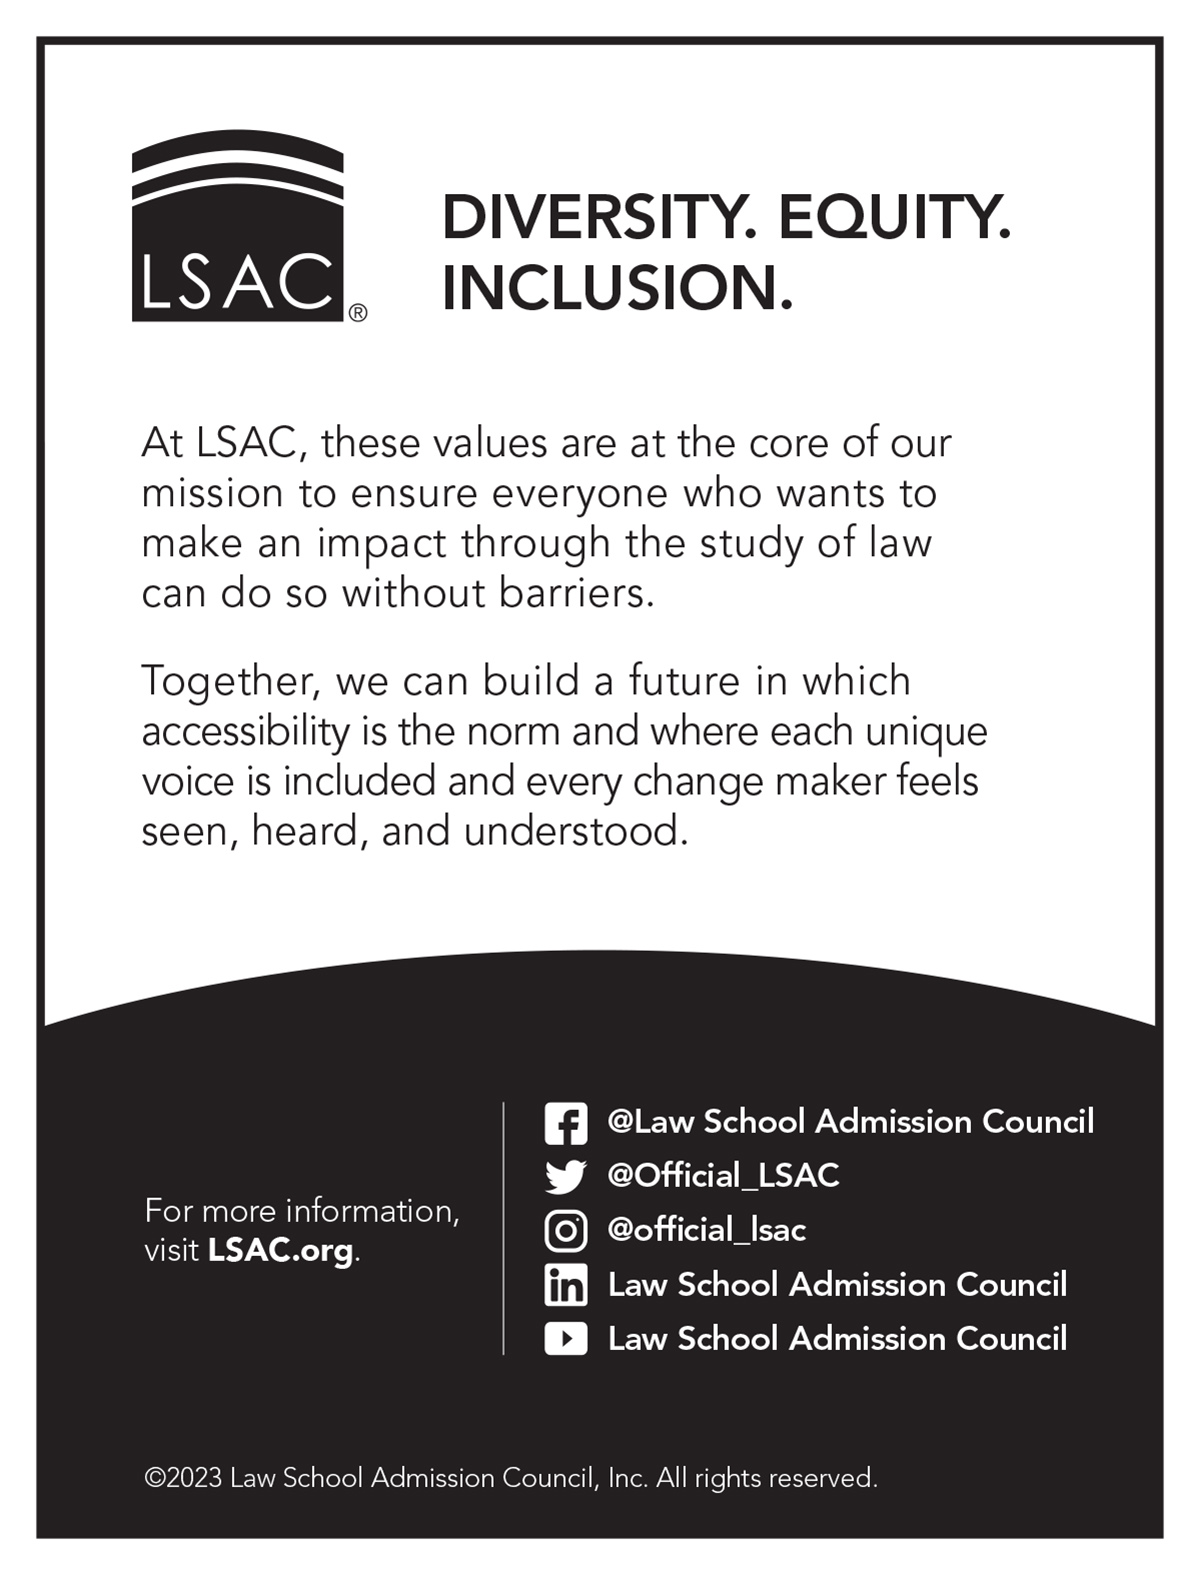 Law School Admission Council Diversity. Equity. Inclusion. At LSAC, these values are at the core of our mission to ensure everyone who wants to make an impact through the study of law can do so without barriers. Together, we can build a future in which accessibility is the norm and where each unique voice is included and every change maker feels seen, heard, and understood. For more information, visit LSAC.org Facebook, YouTube, and LinkedIn: Law School Admission Council; Twitter and Instagram: @Official_LSAC